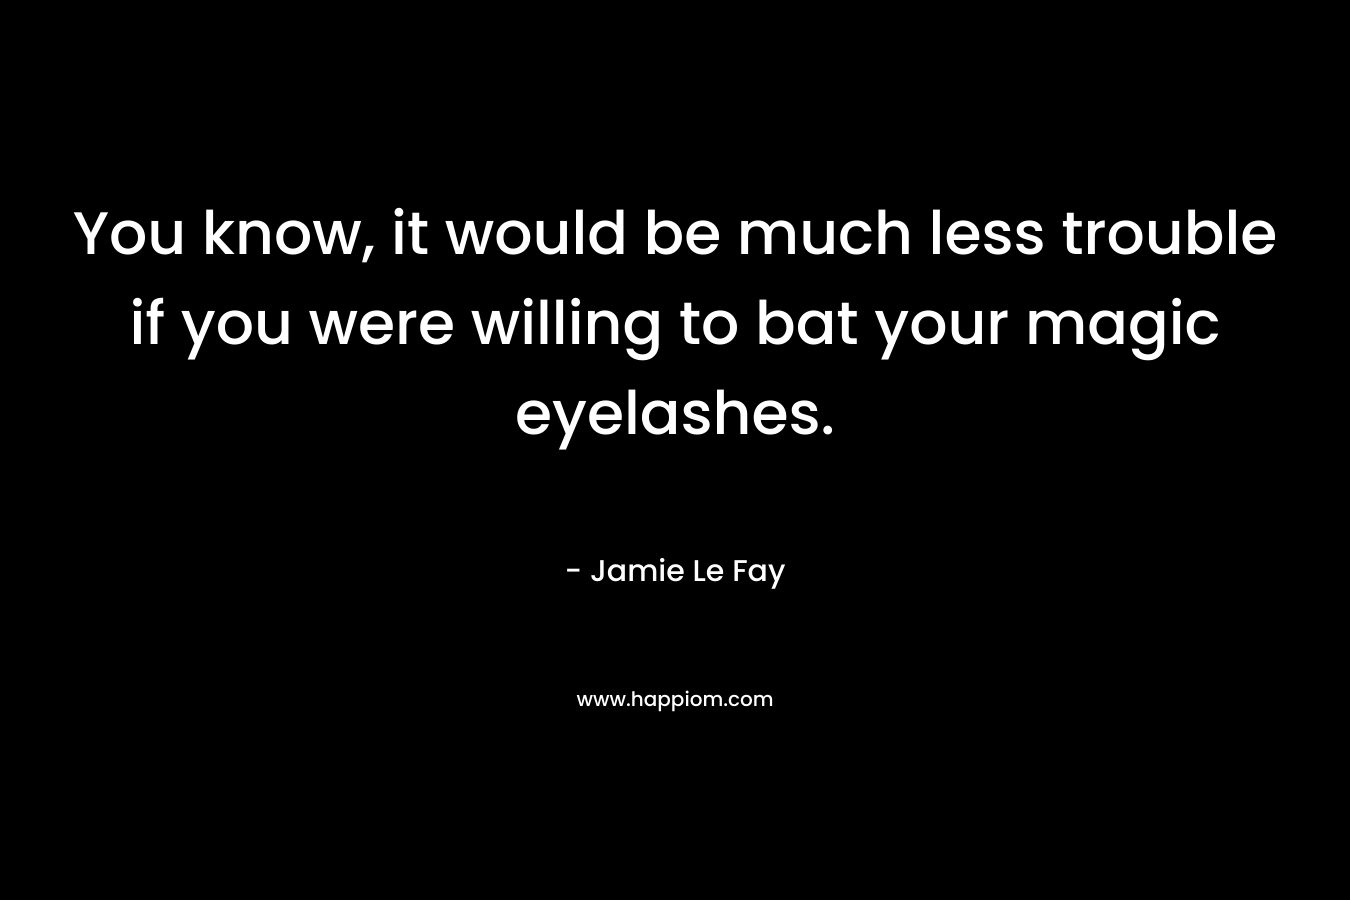 You know, it would be much less trouble if you were willing to bat your magic eyelashes. – Jamie Le Fay